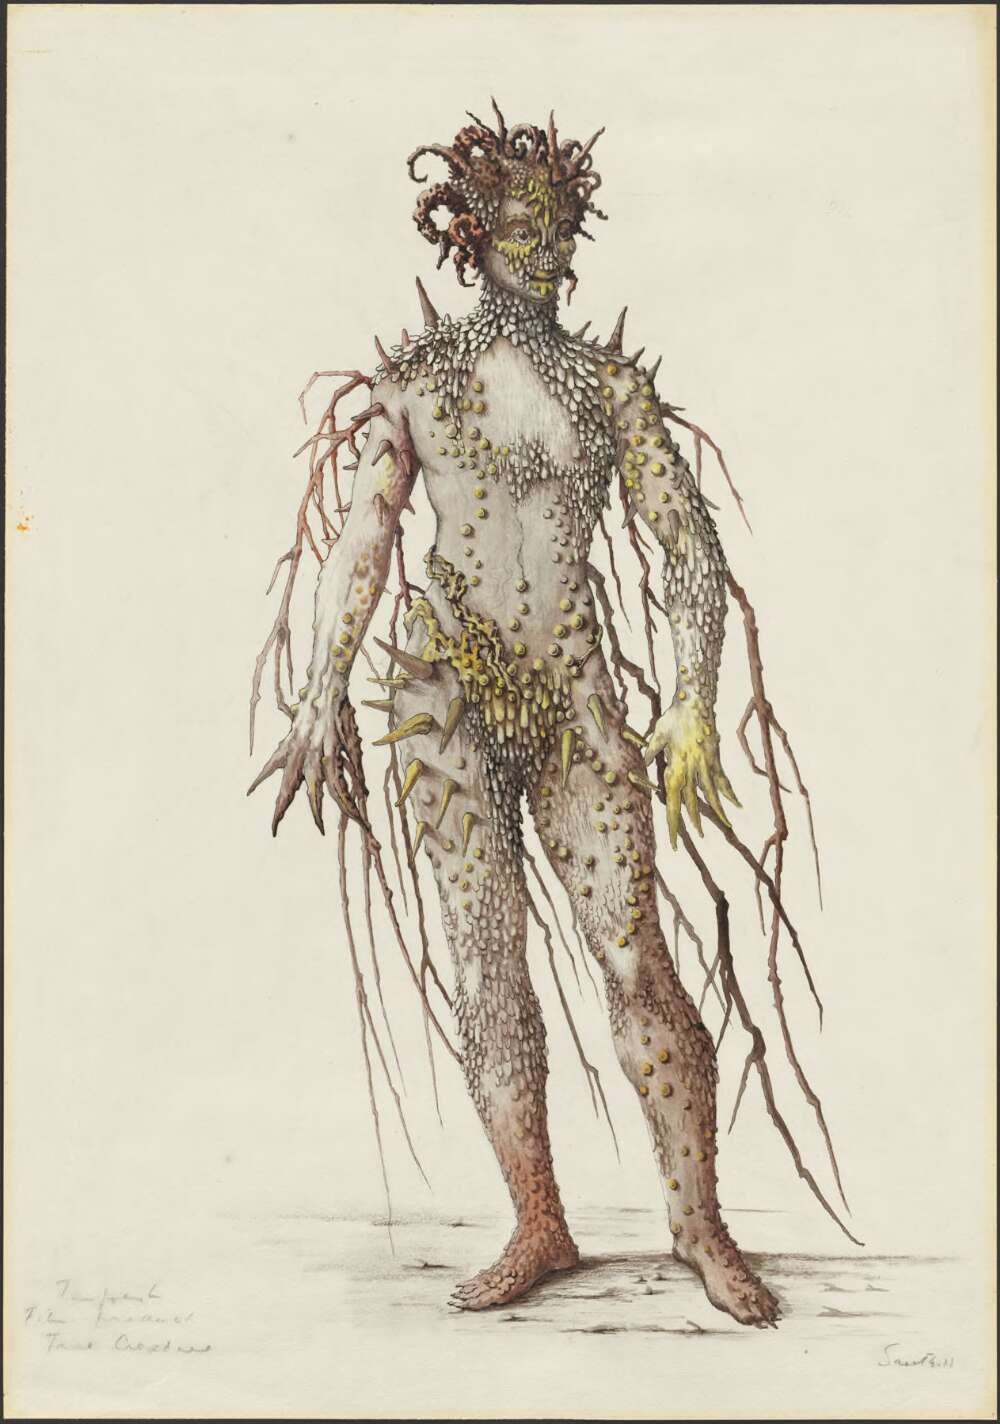 A sketch of a costume; a creature overgrown with branches to look like a tree